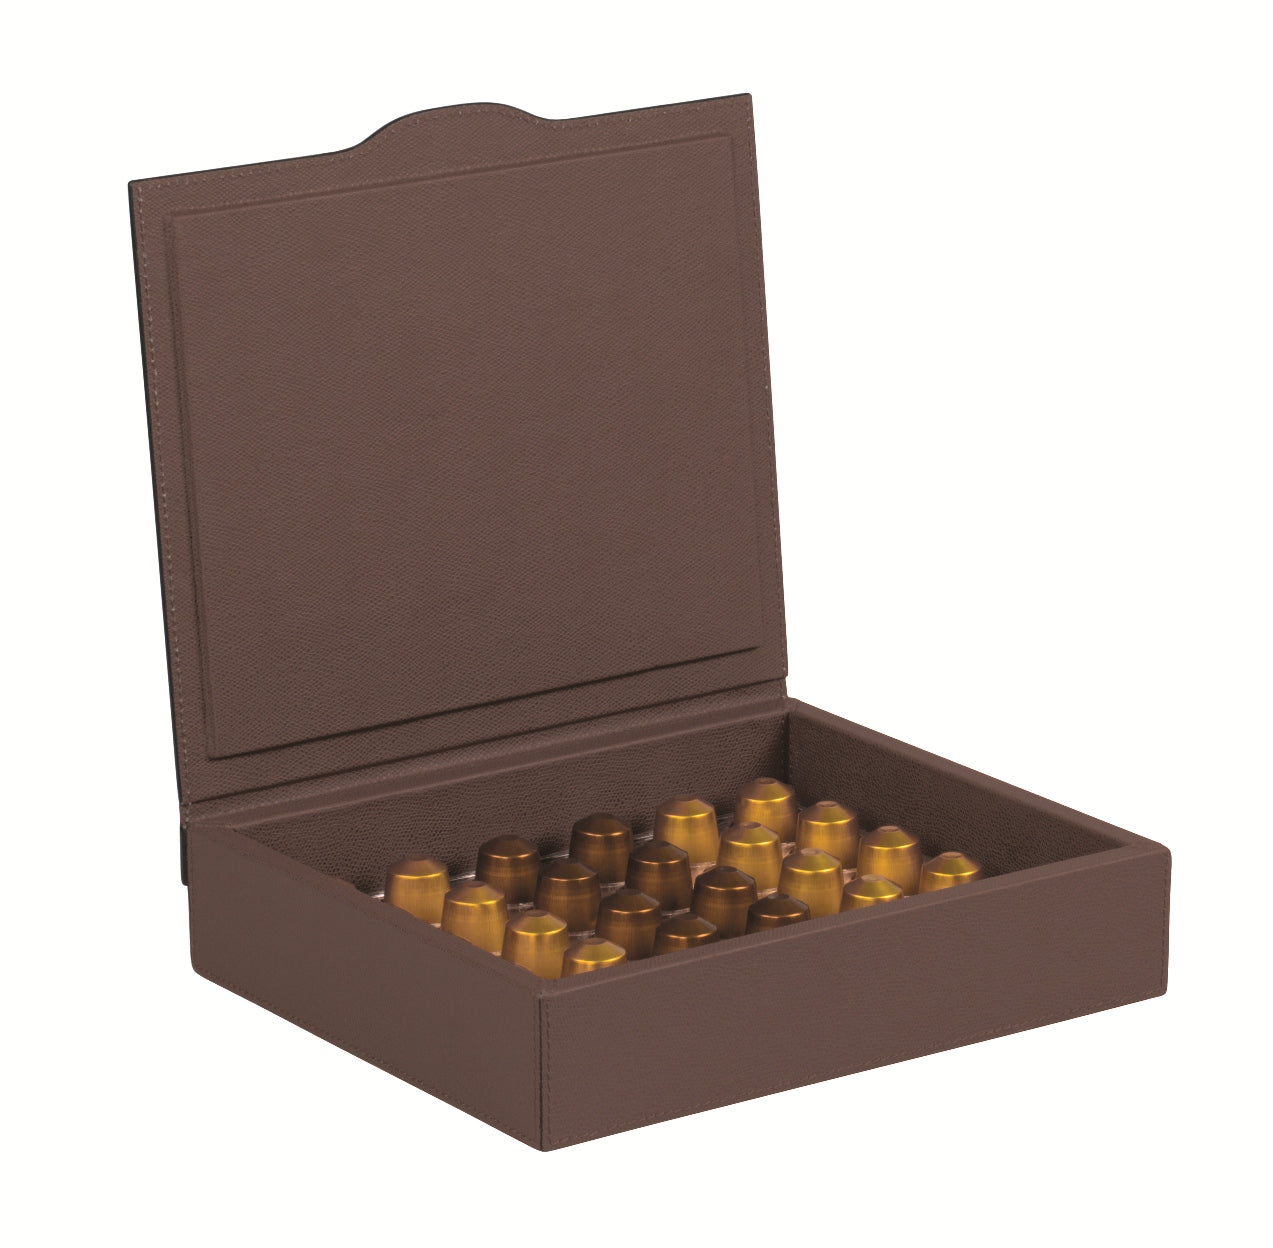 Giobagnara Luna Box for Nespresso Capsules | Leather-Covered Wood Structure with Hinged Lid | Stylish and Functional Design | Accommodates 30 Nespresso Capsules | Explore a Range of Luxury Coffee Accessories at 2Jour Concierge, #1 luxury high-end gift & lifestyle shop